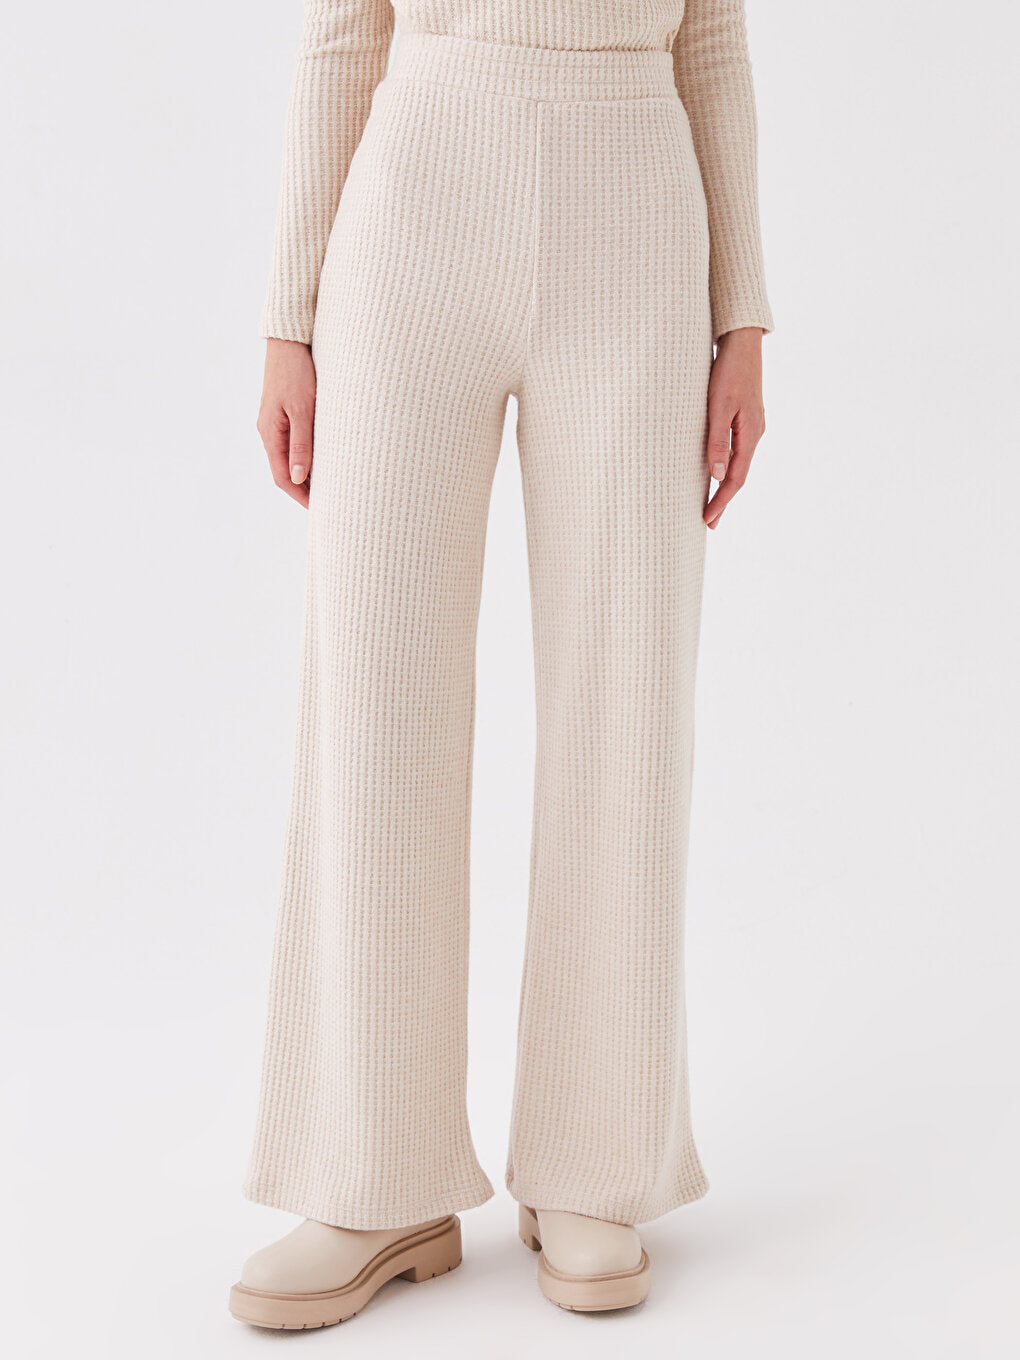 Self-patterned Women Trousers with Elastic Waist